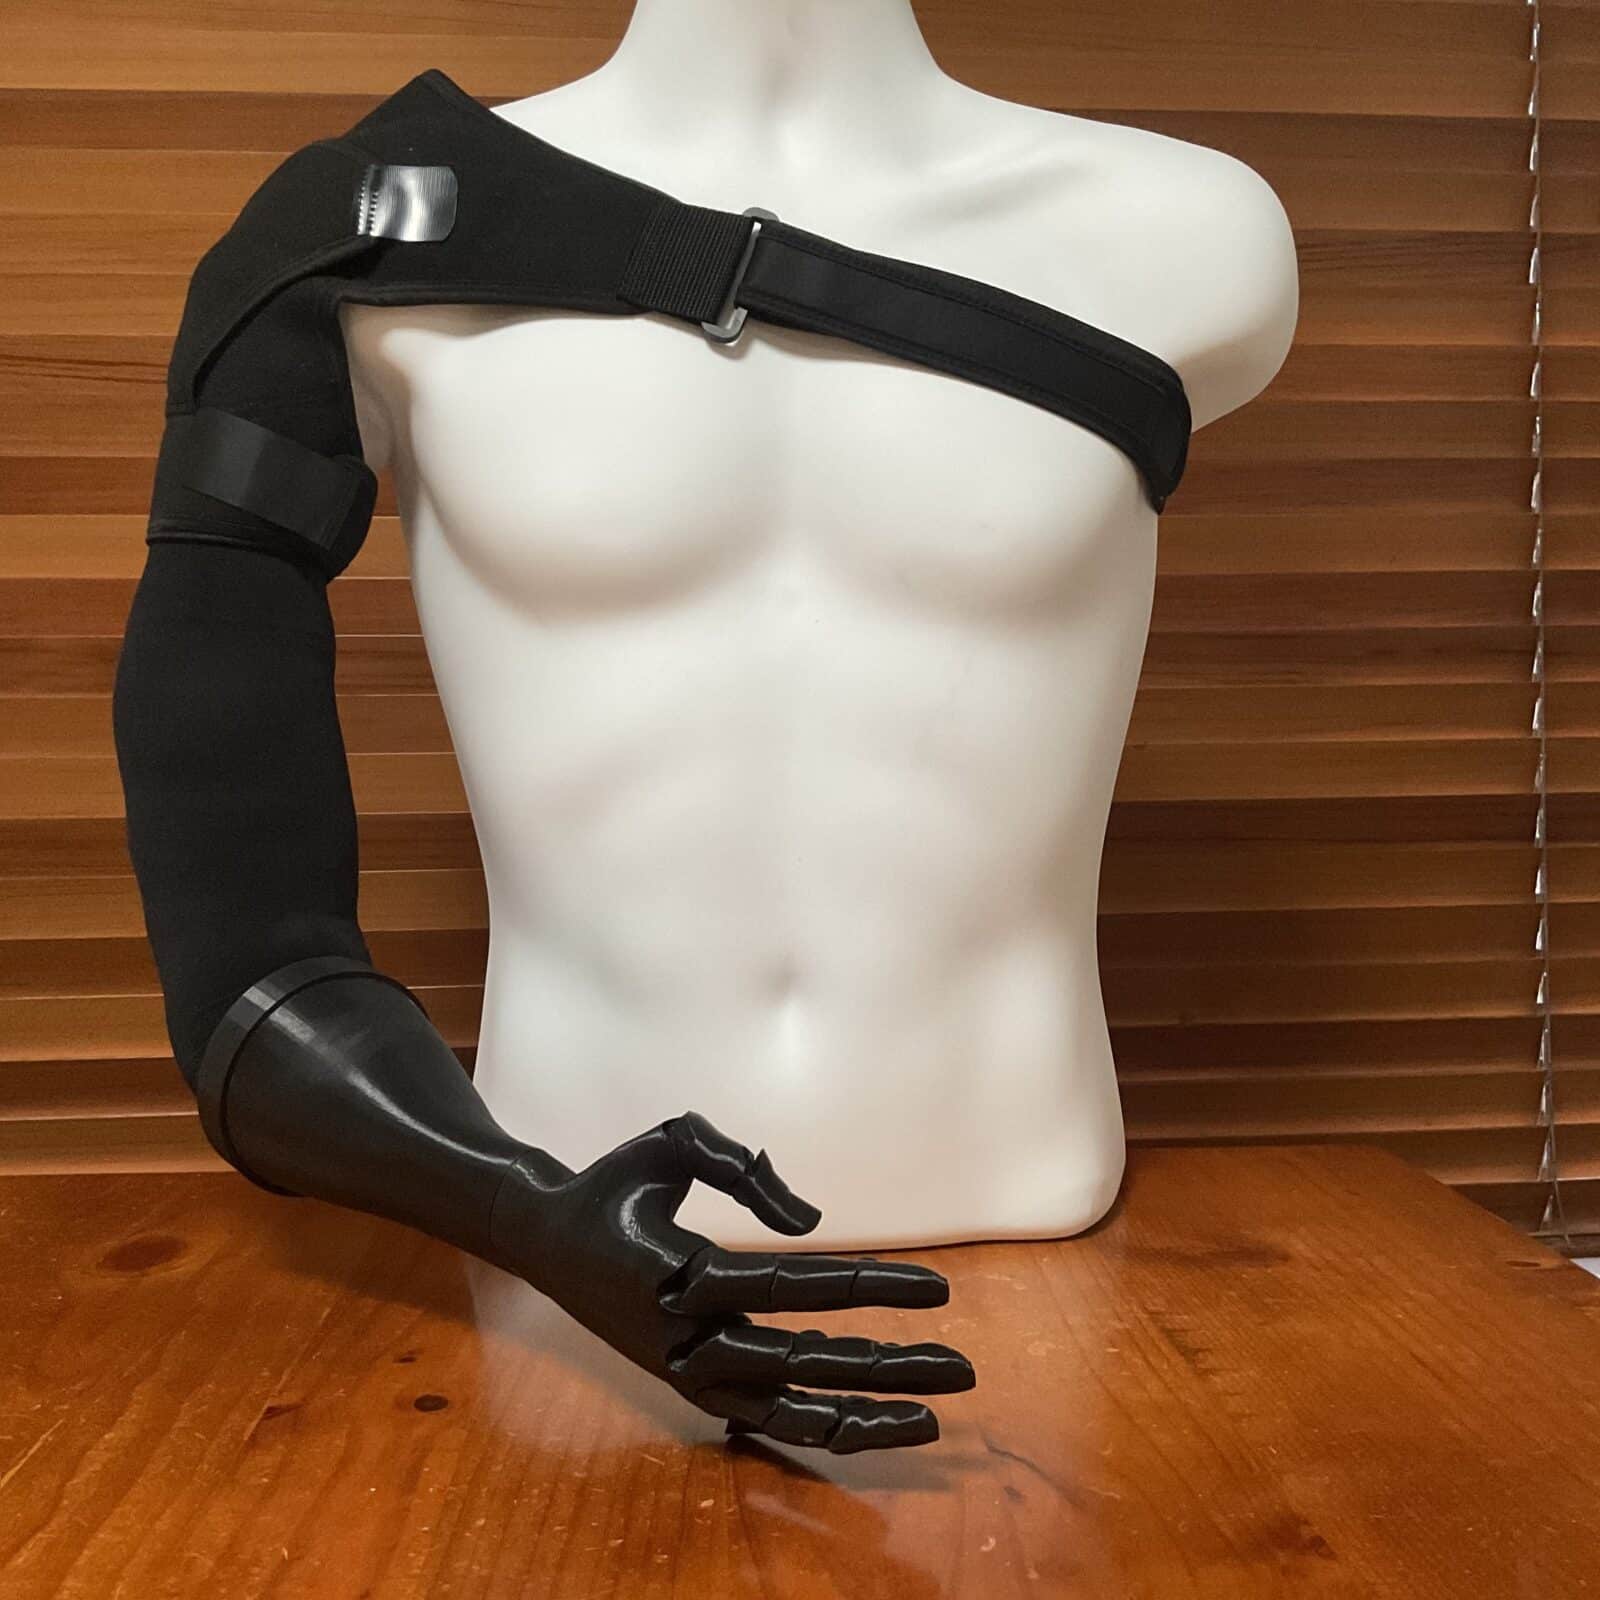 The New Prosthetic Harness